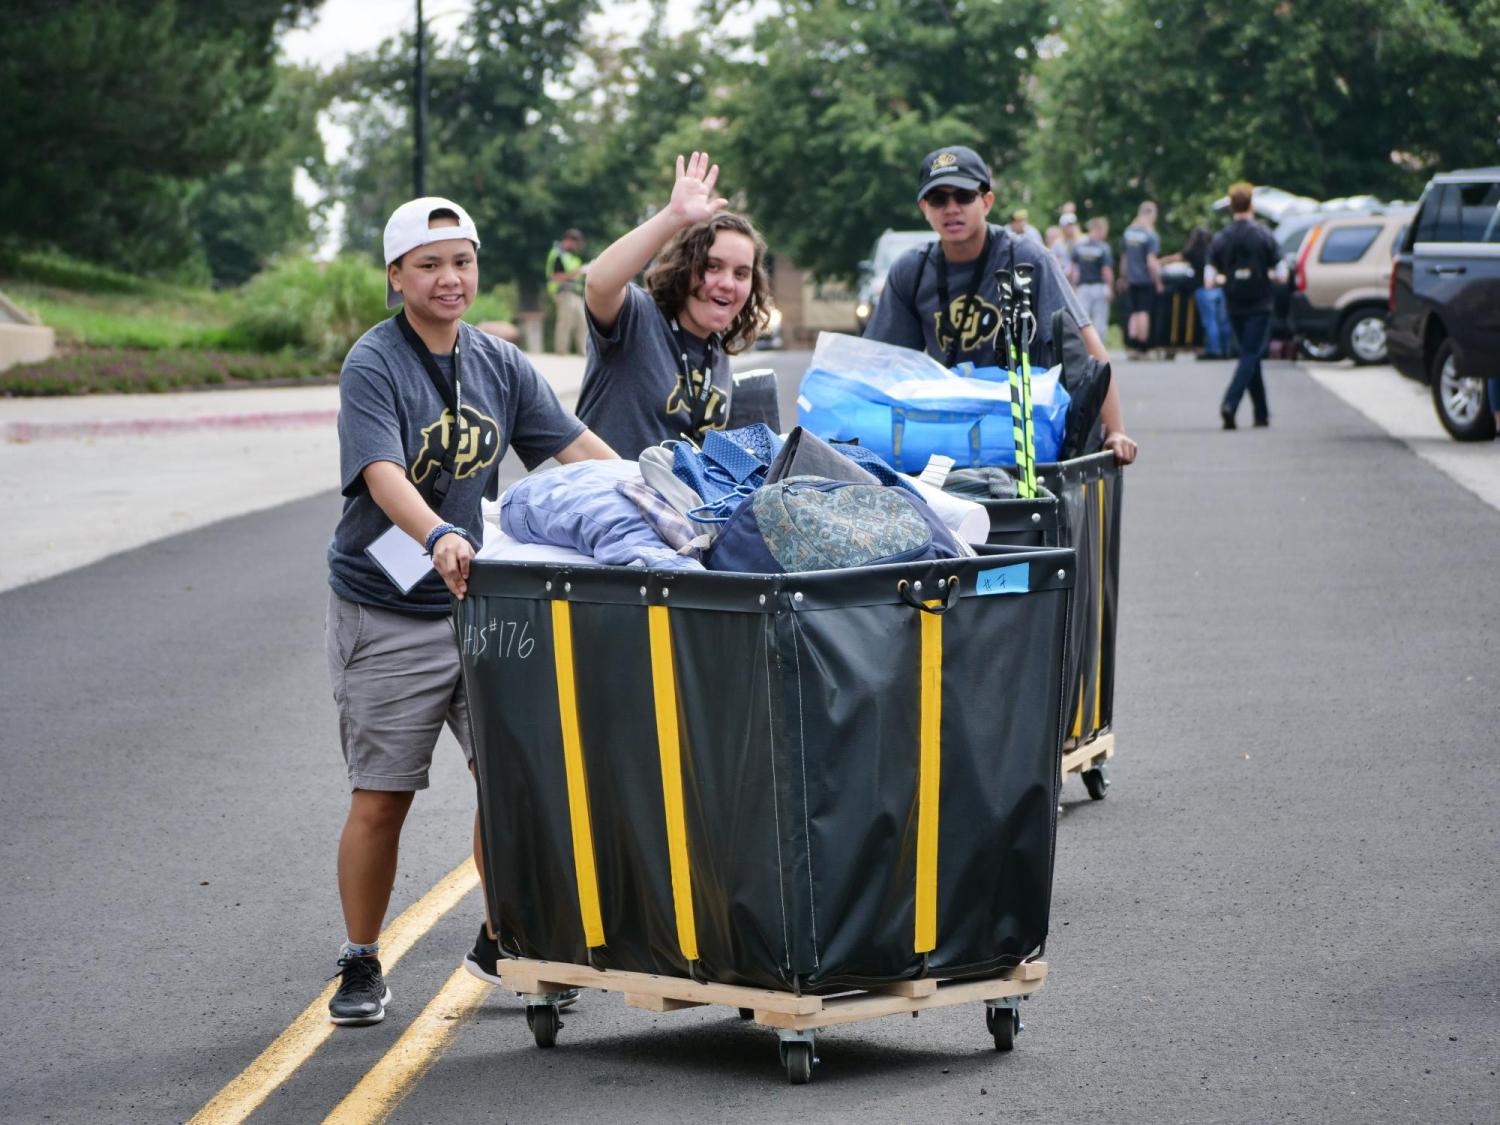 Photos, video Class of 2022 moved in, given a Buff CU